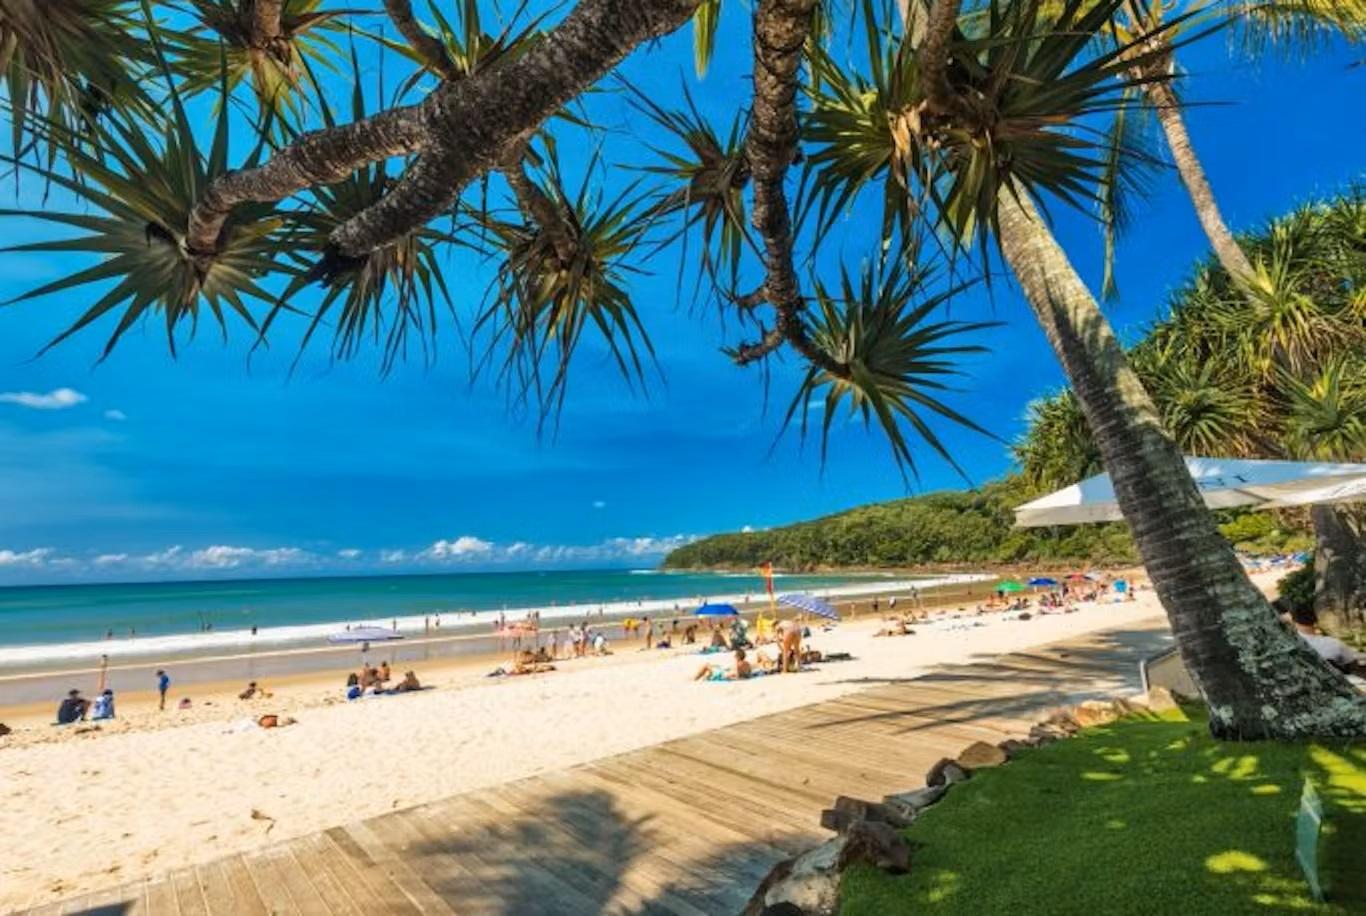 The Noosa World Surfing Reserve